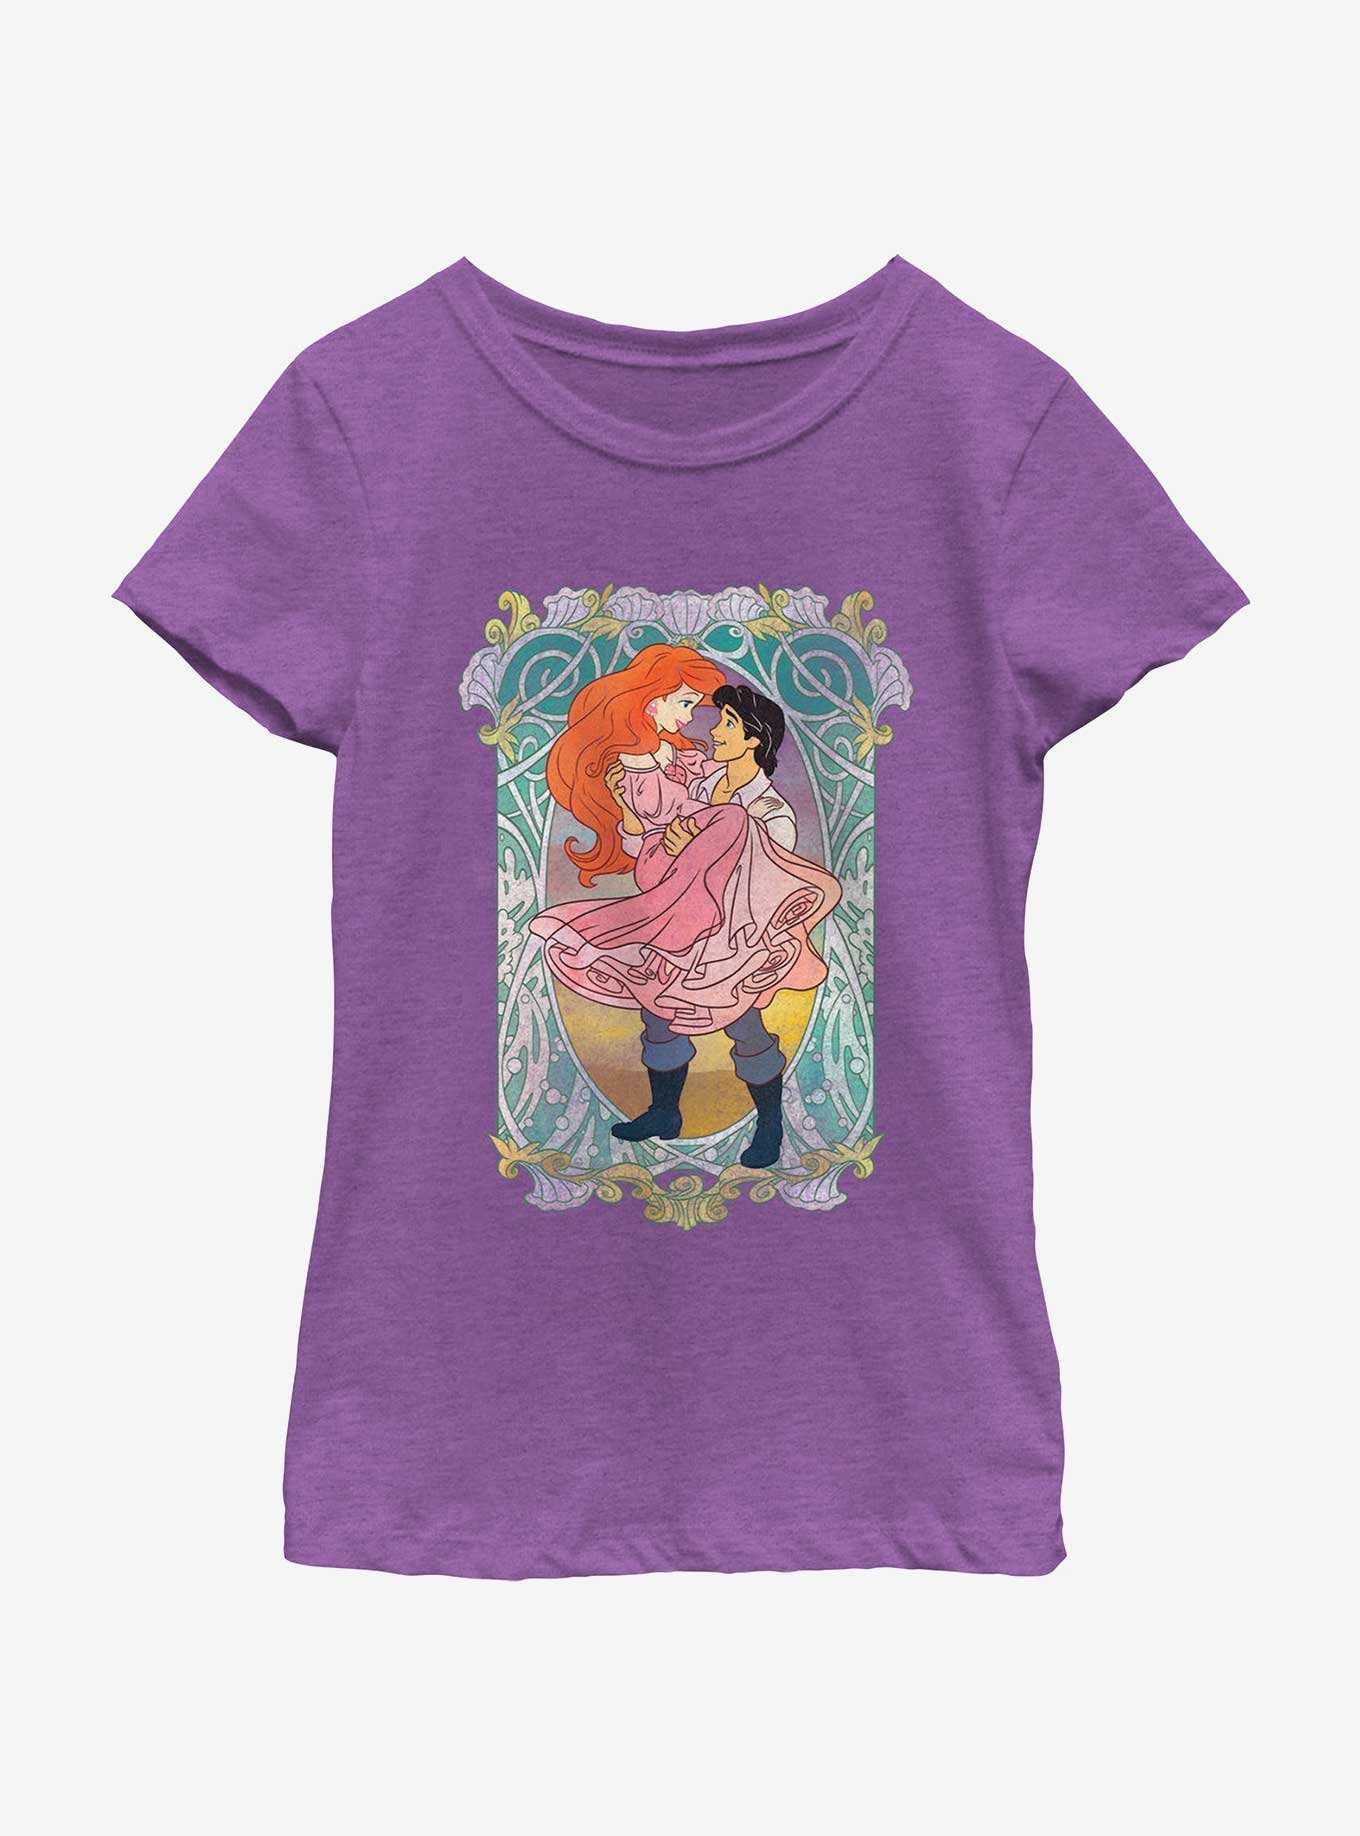 Disney The Little Mermaid Ariel and Eric Ever After Girls Youth T-Shirt, , hi-res